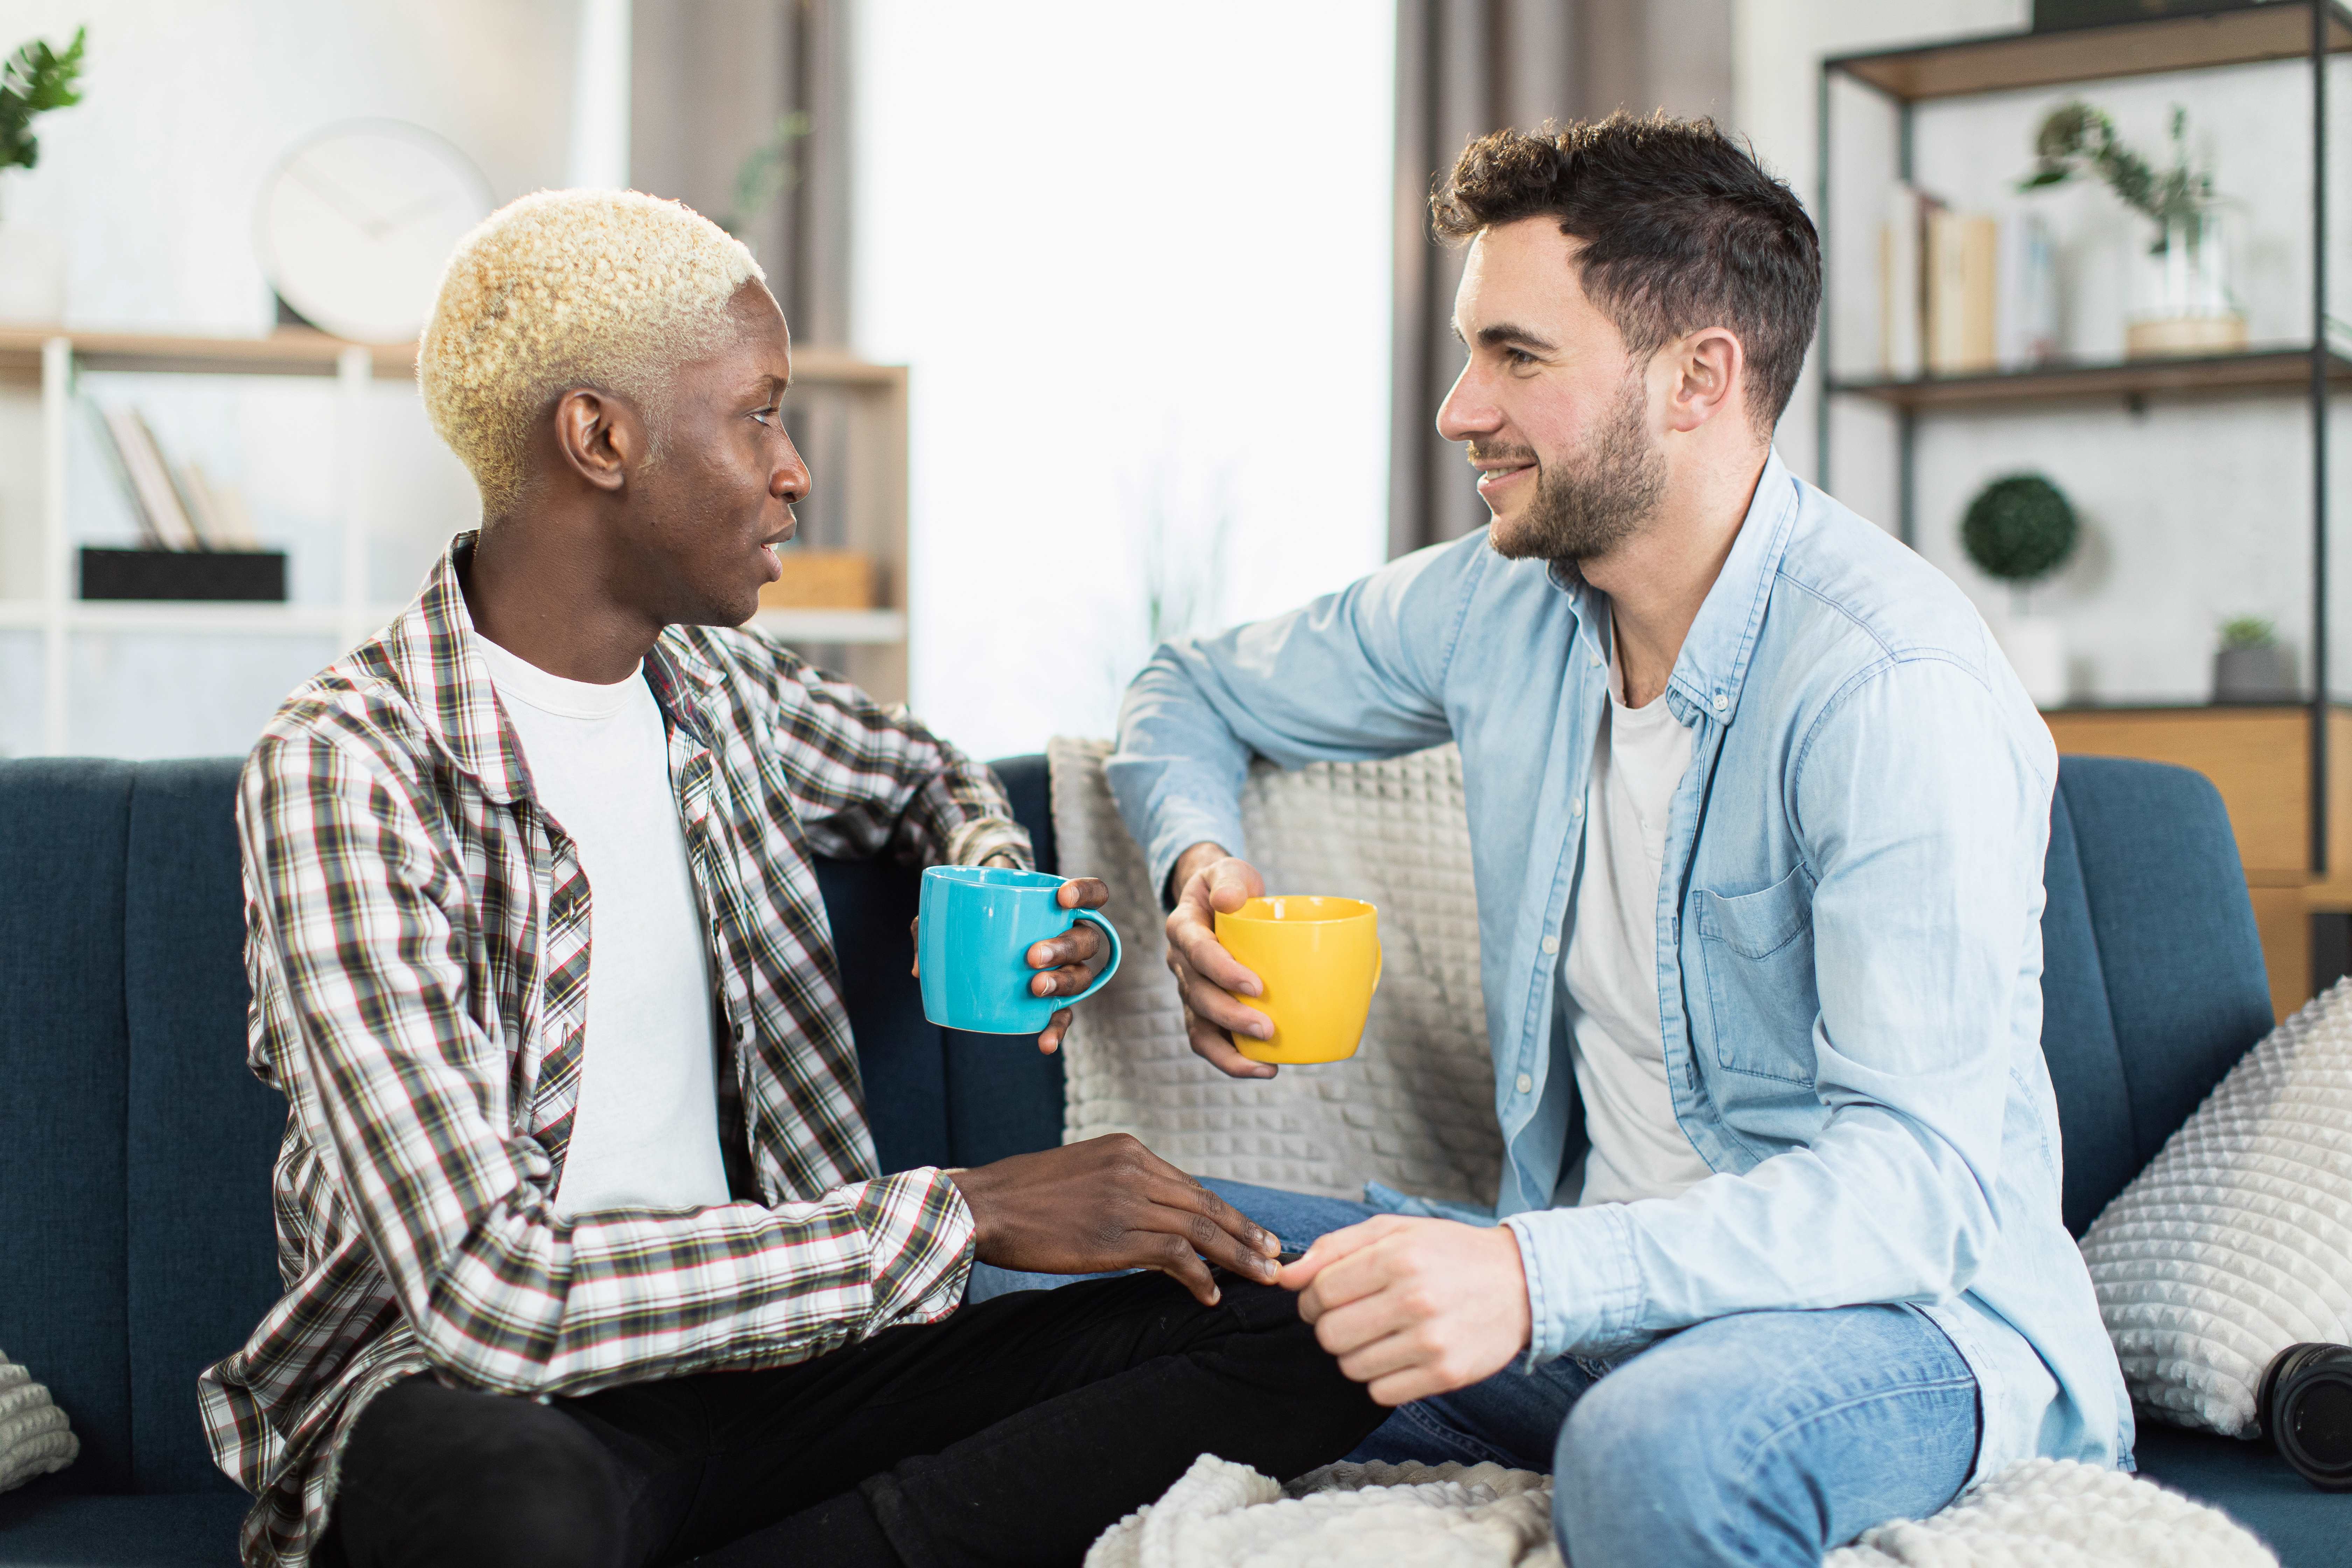 Two men holding mugs and sat chatting on a sofa